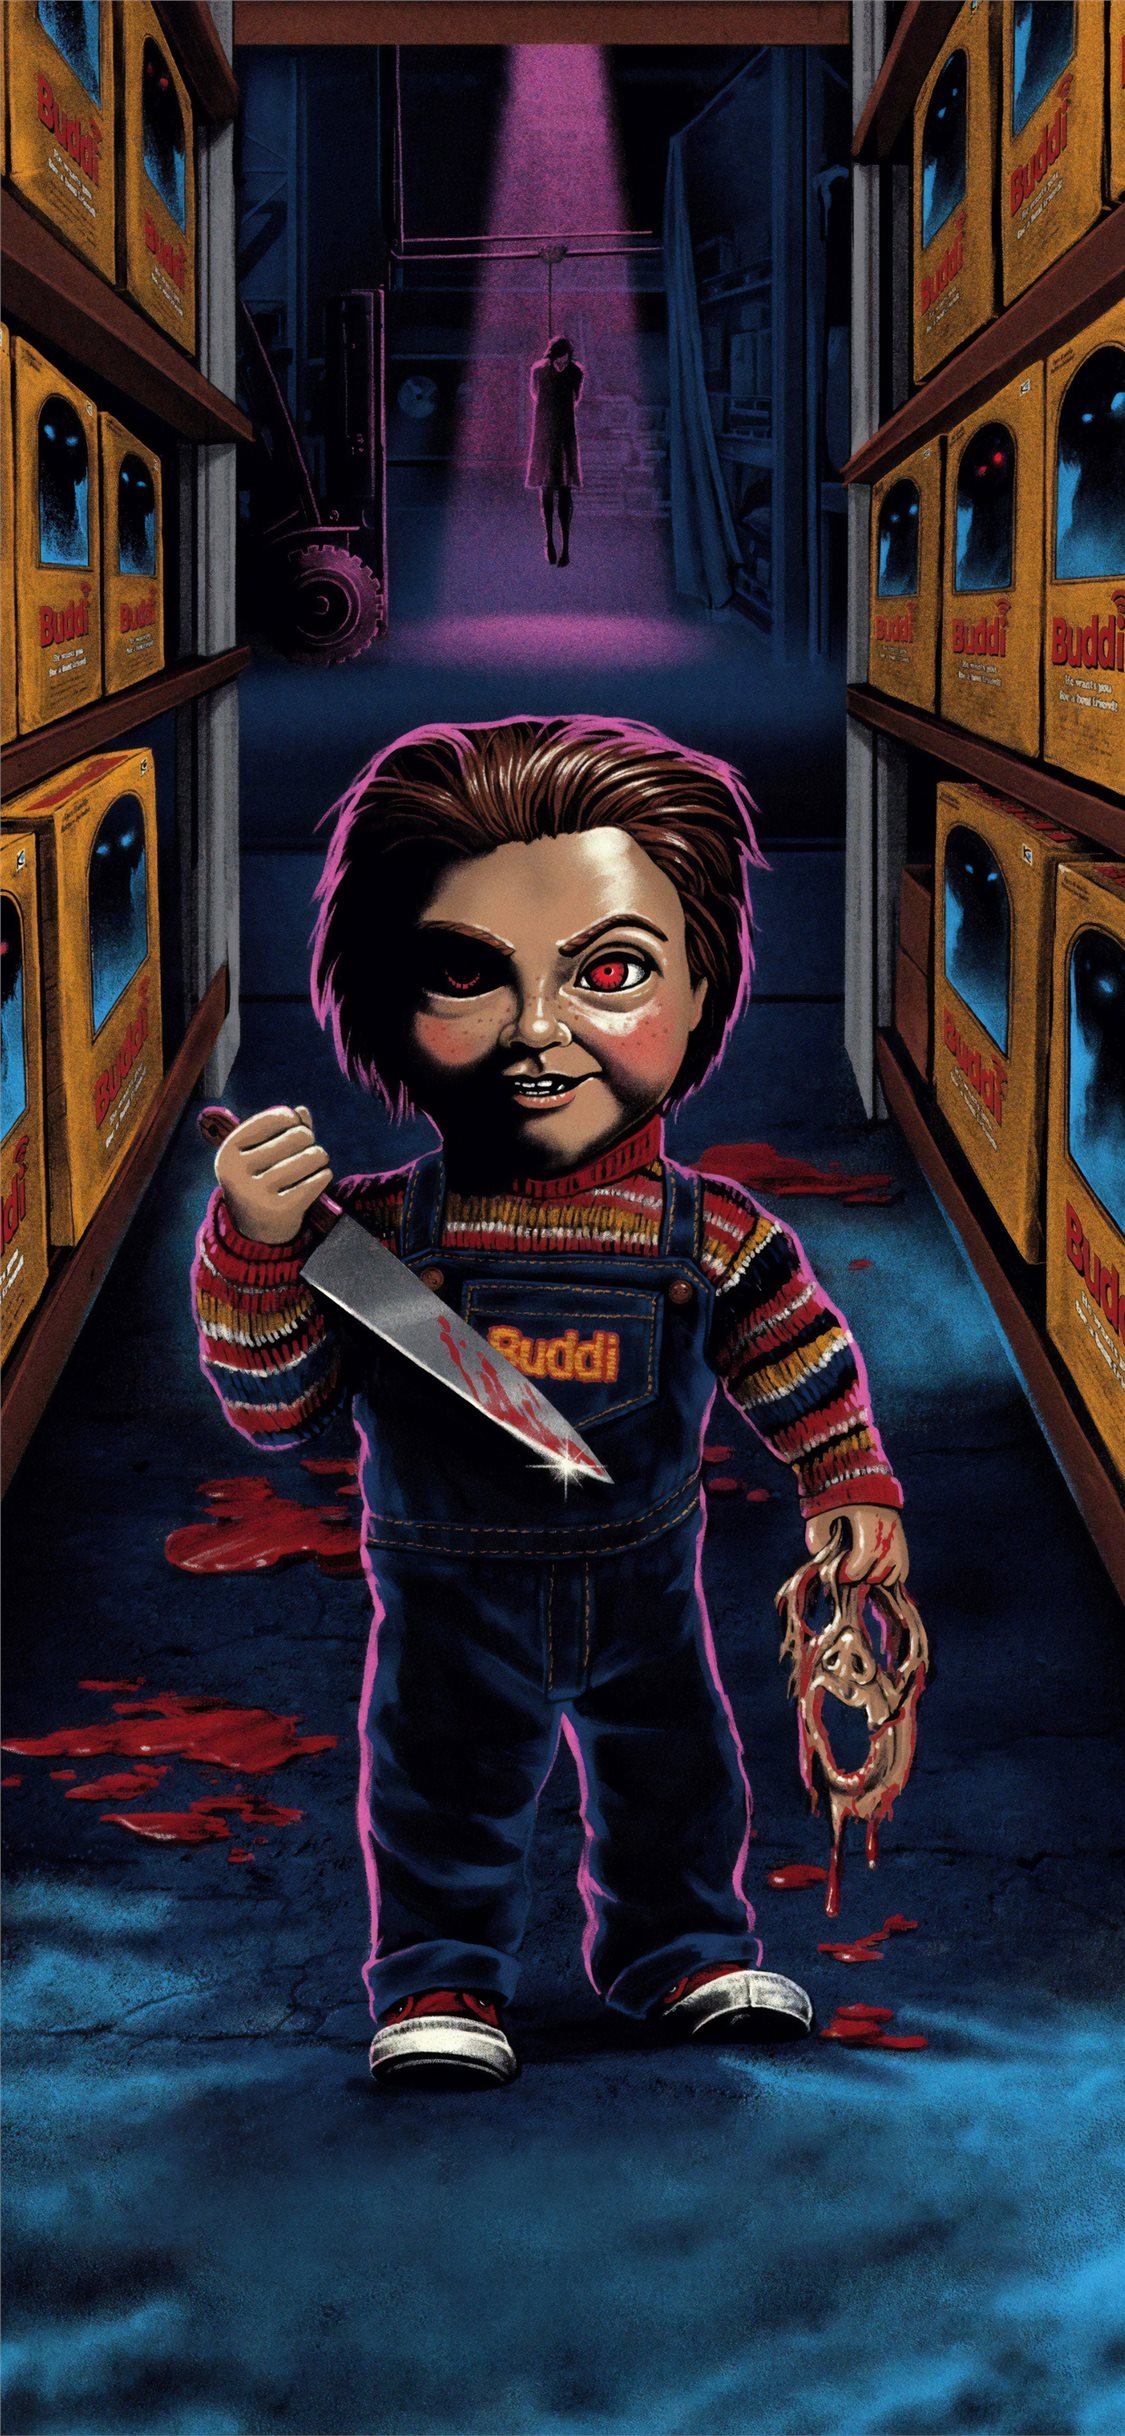 Childs Play 2019 Phone Wallpaper  Mobile Abyss